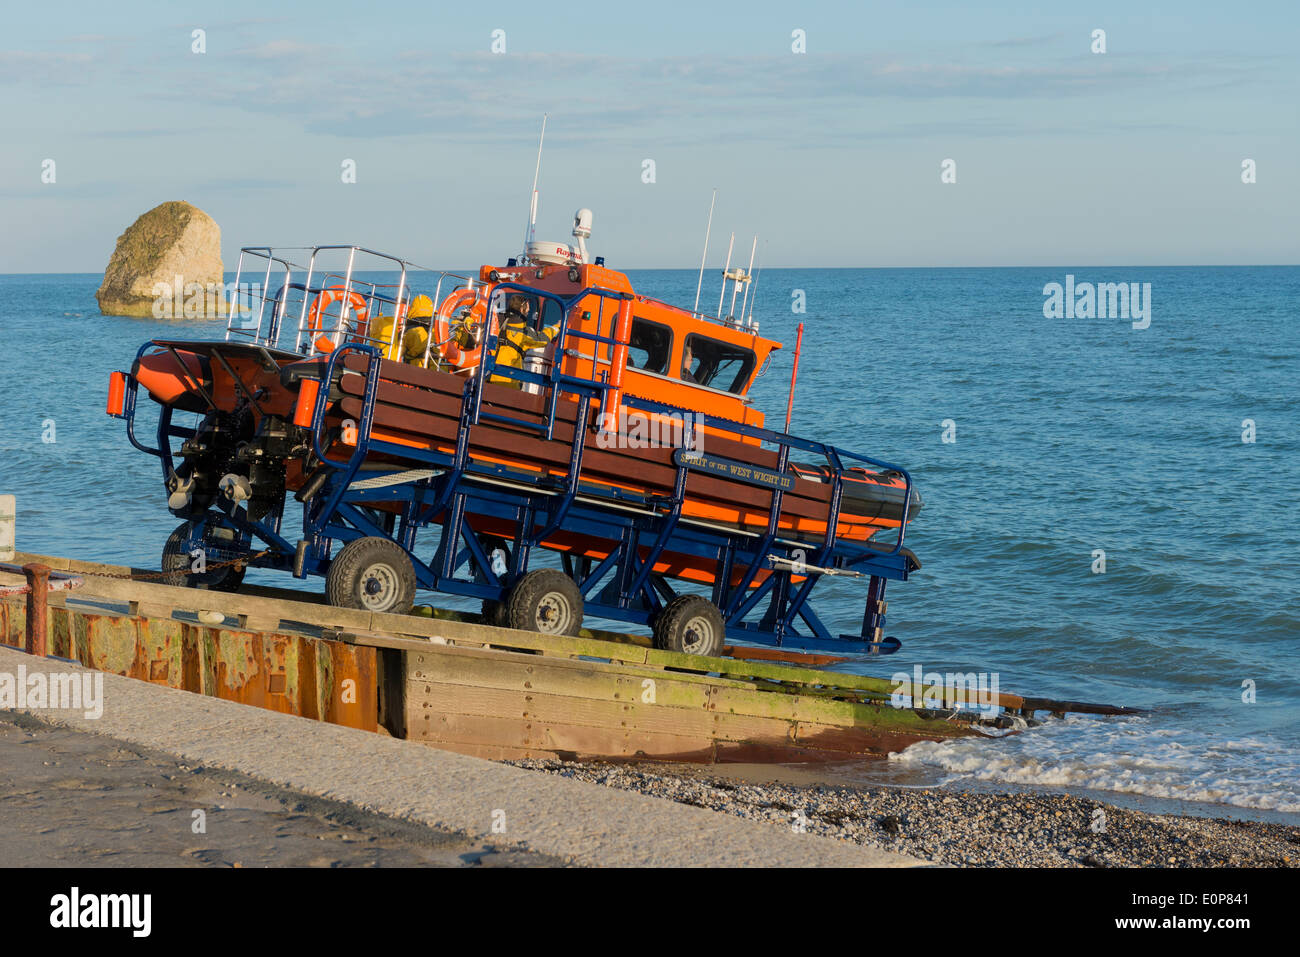 spirit of west wight freshwater independent lifeboat going dow sli[pway on cradle at freshwater isle of wight UK Stock Photo